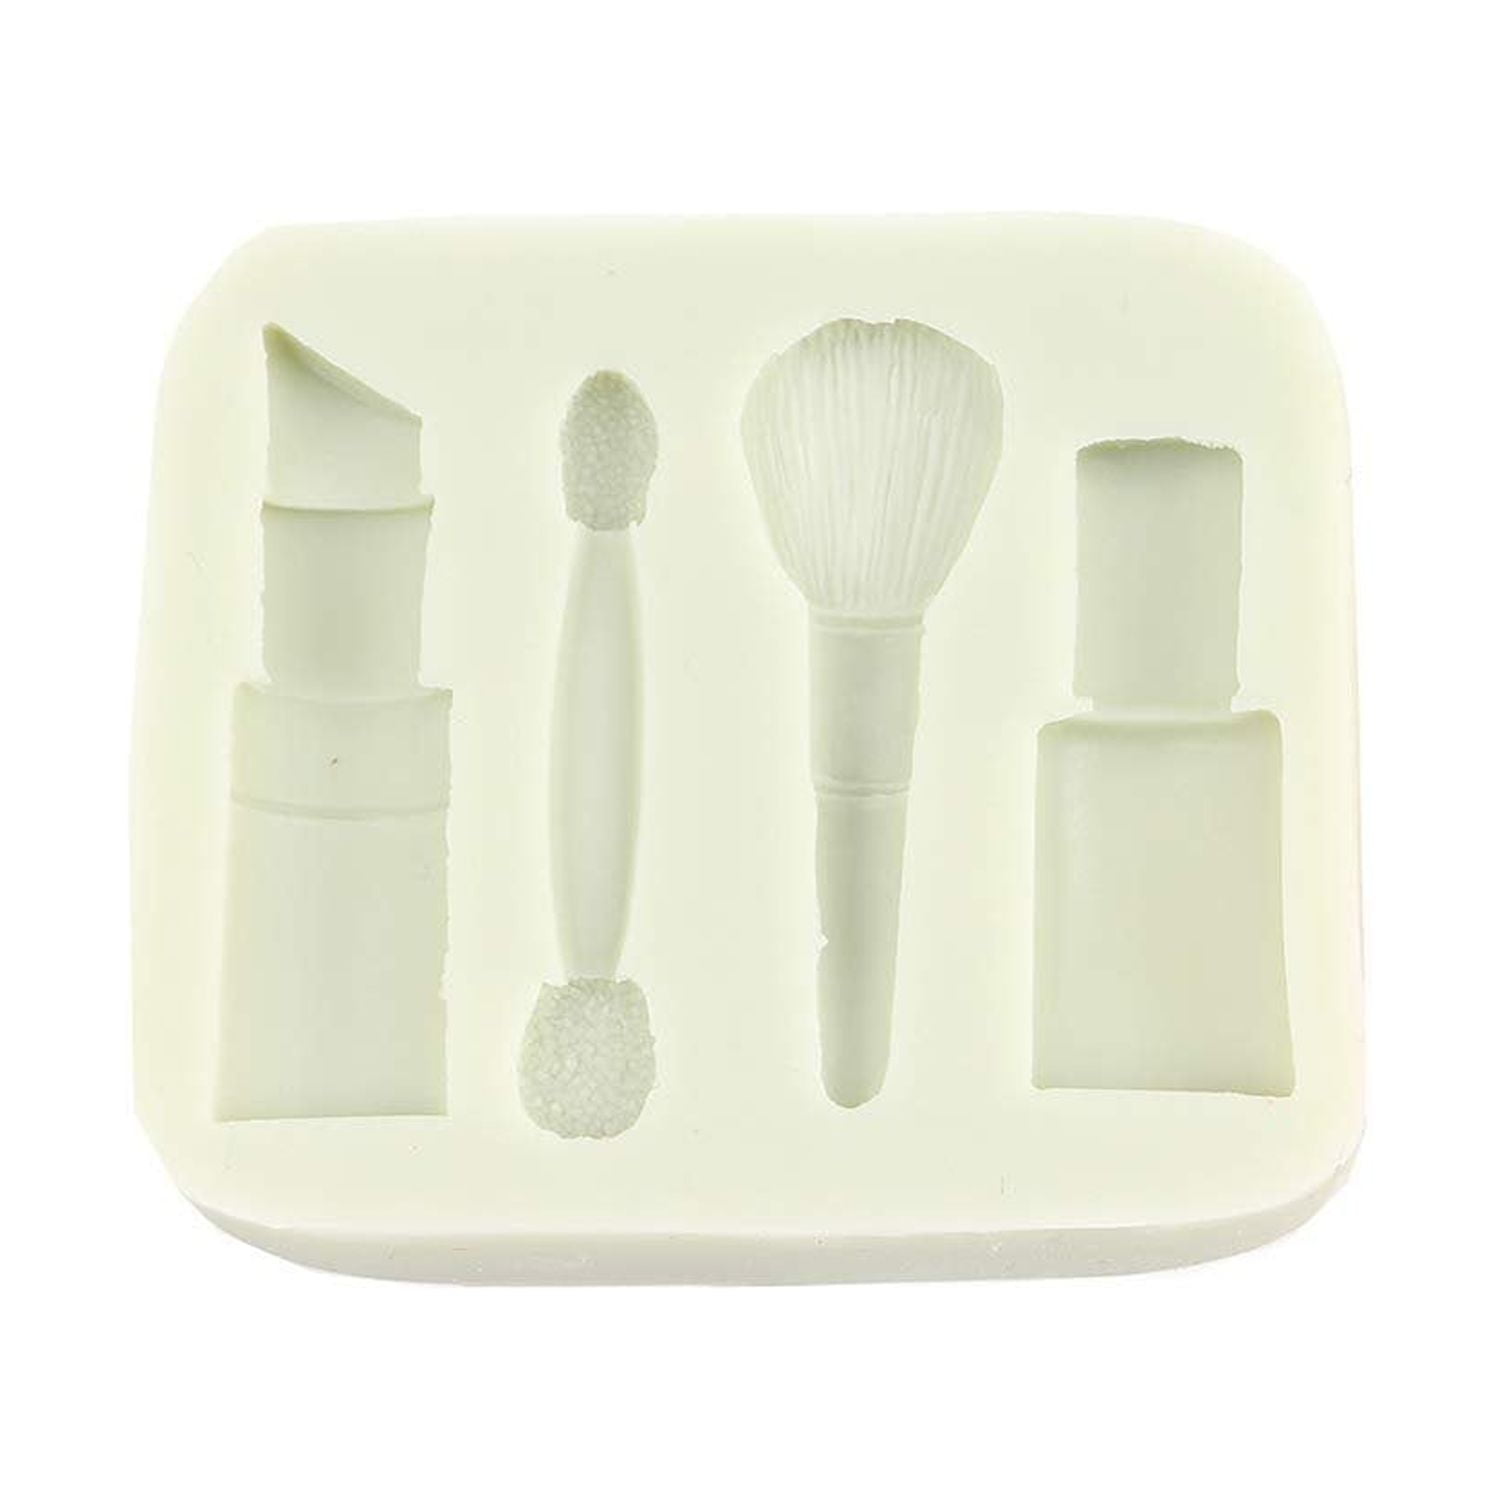 O'Creme Orchid Fondant-Forming Set - 3 Tinplate Cutters and 3 Two-Piece  Silicone-Mold Sets